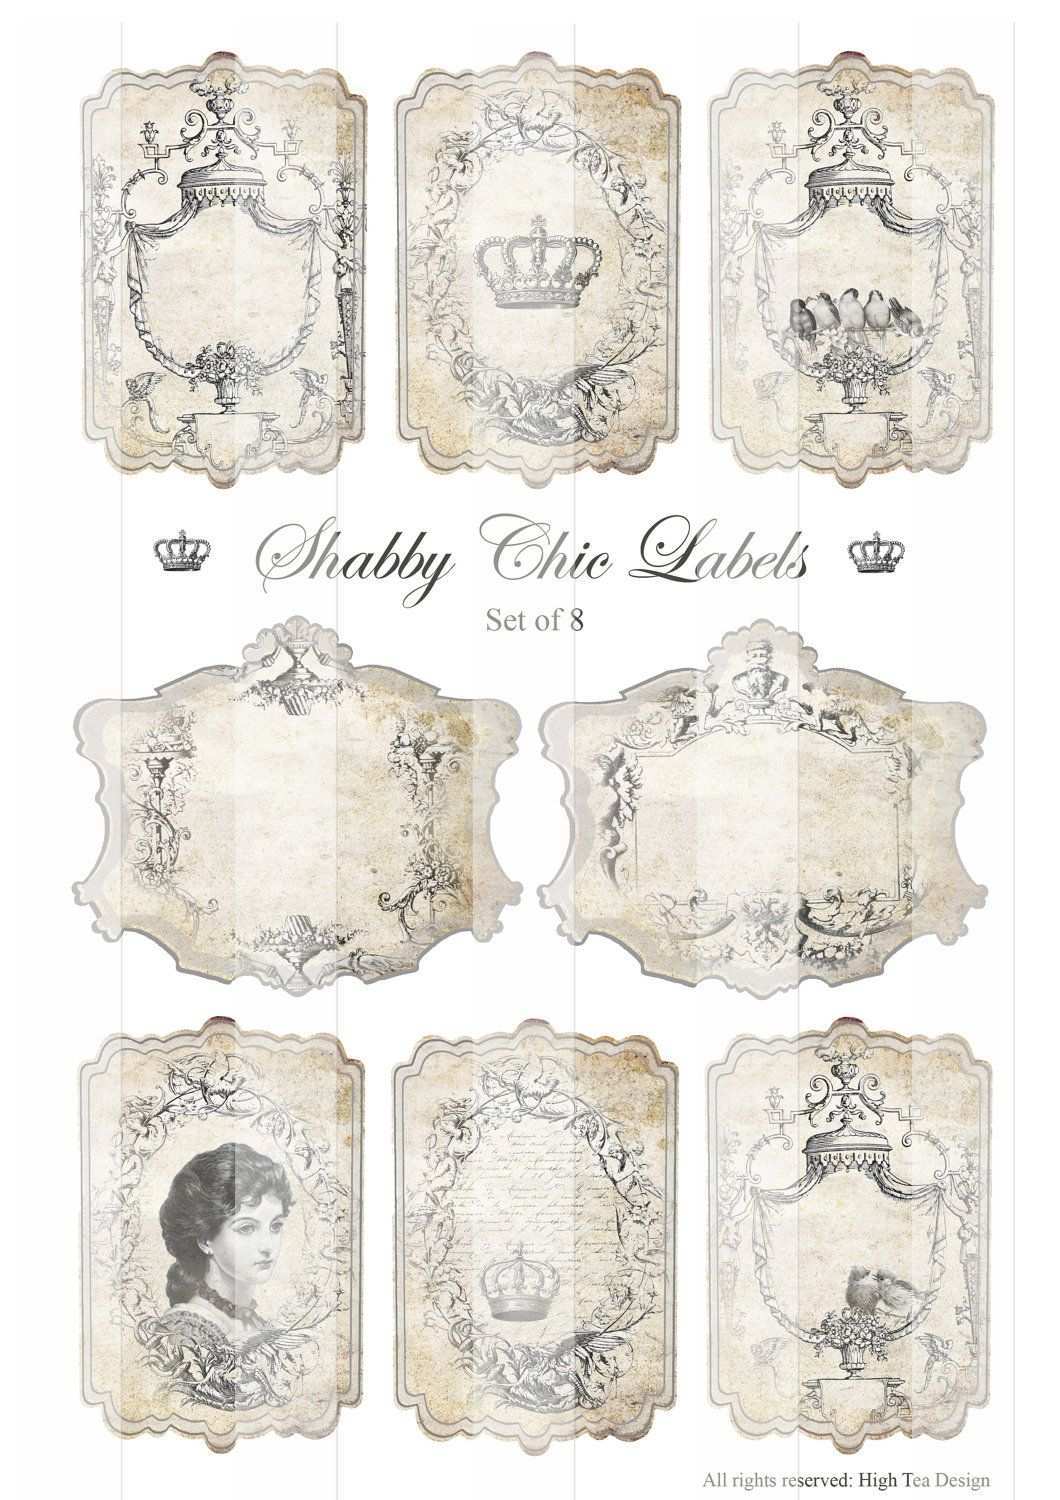 Free Chic Printable Gift Tags Shabby Chic Labels Gift Tags Epherma Hang Tags Digital Collage Mit Bildern Vintage Etiketten Vintage Tags Schabby Schick